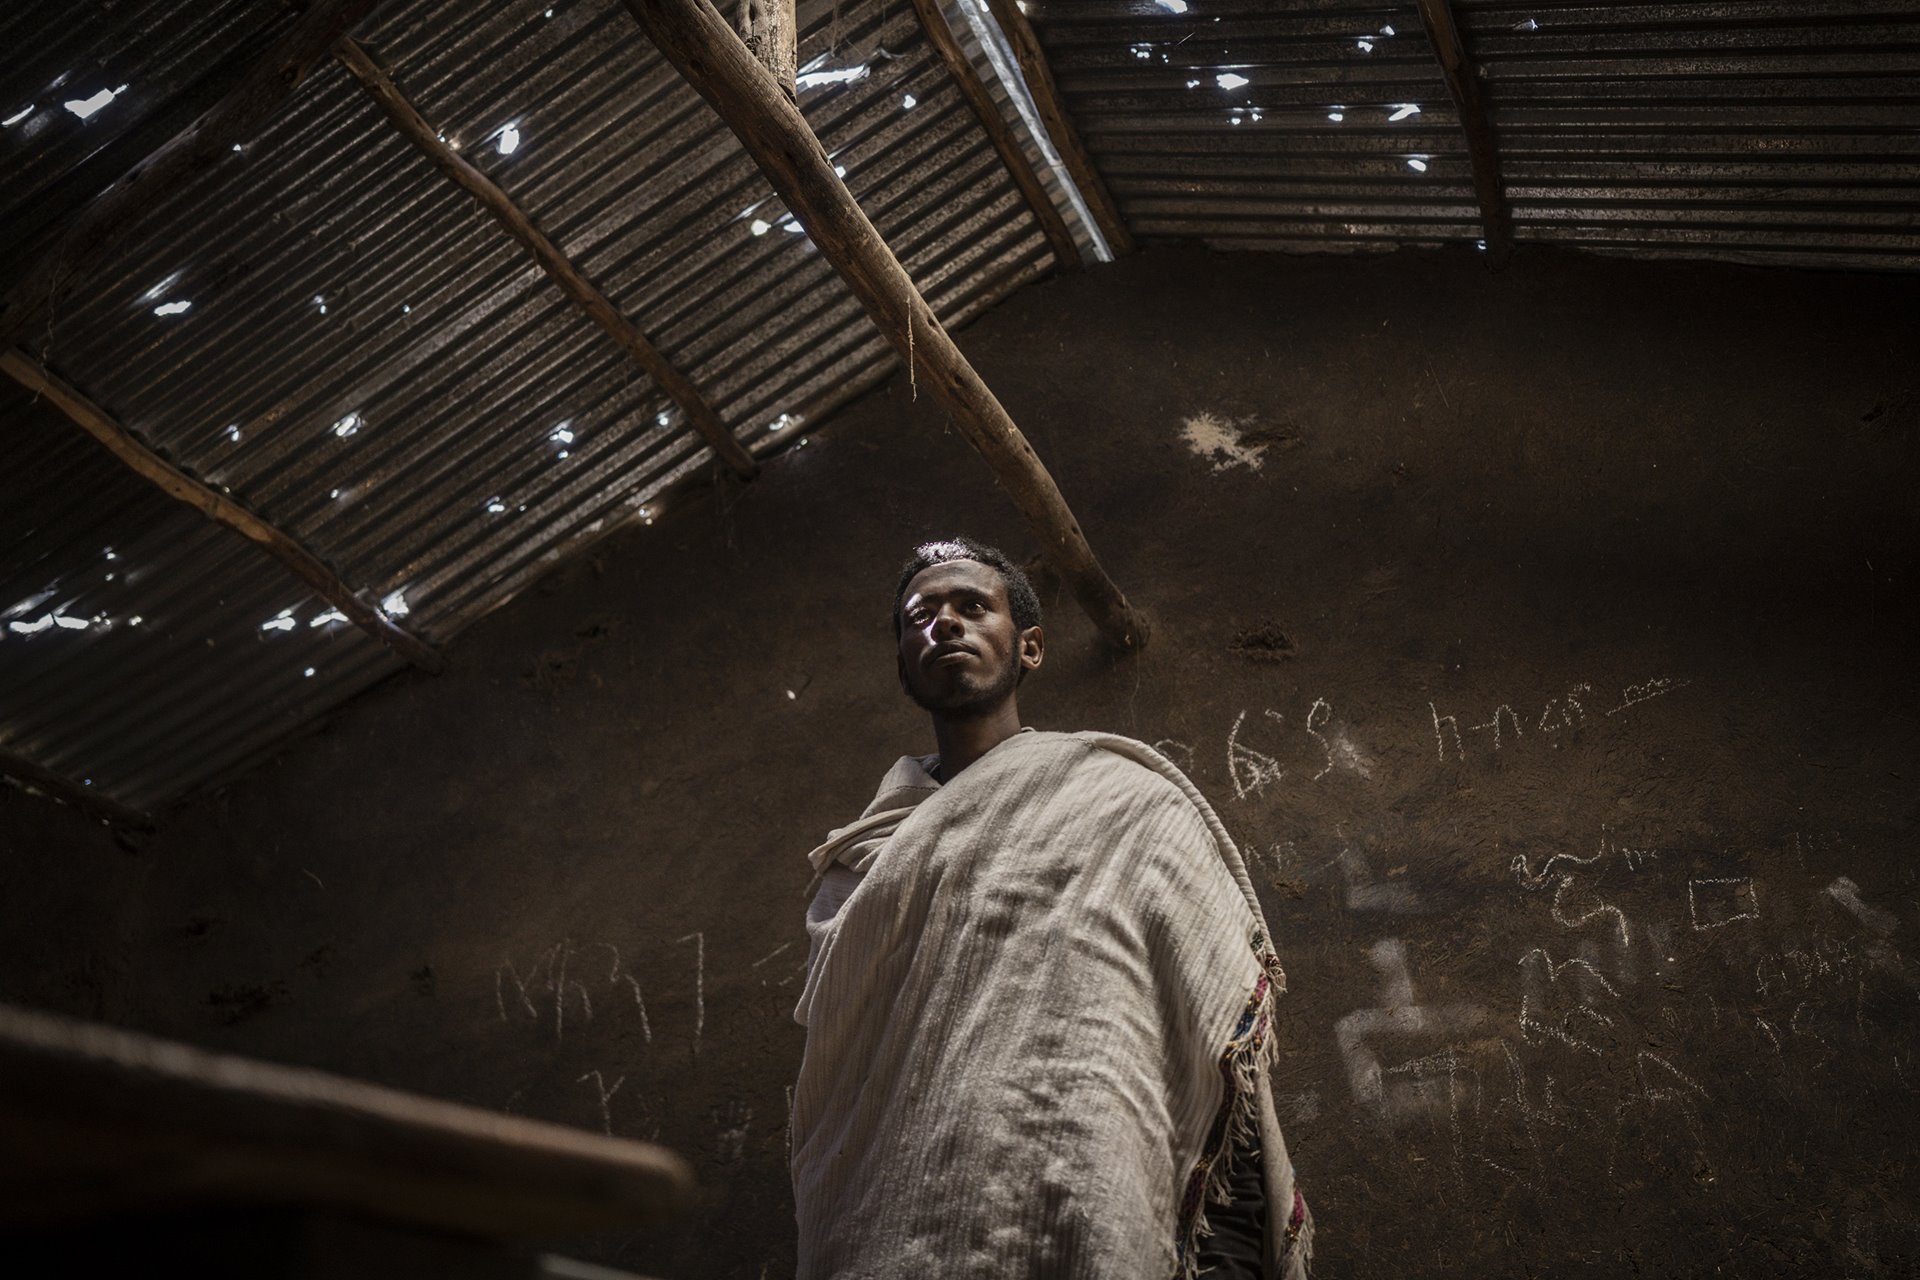 Hailemariam Girma looks at a damaged school, allegedly looted by pro-Tigray forces in Mesobit, Amhara, Ethiopia.